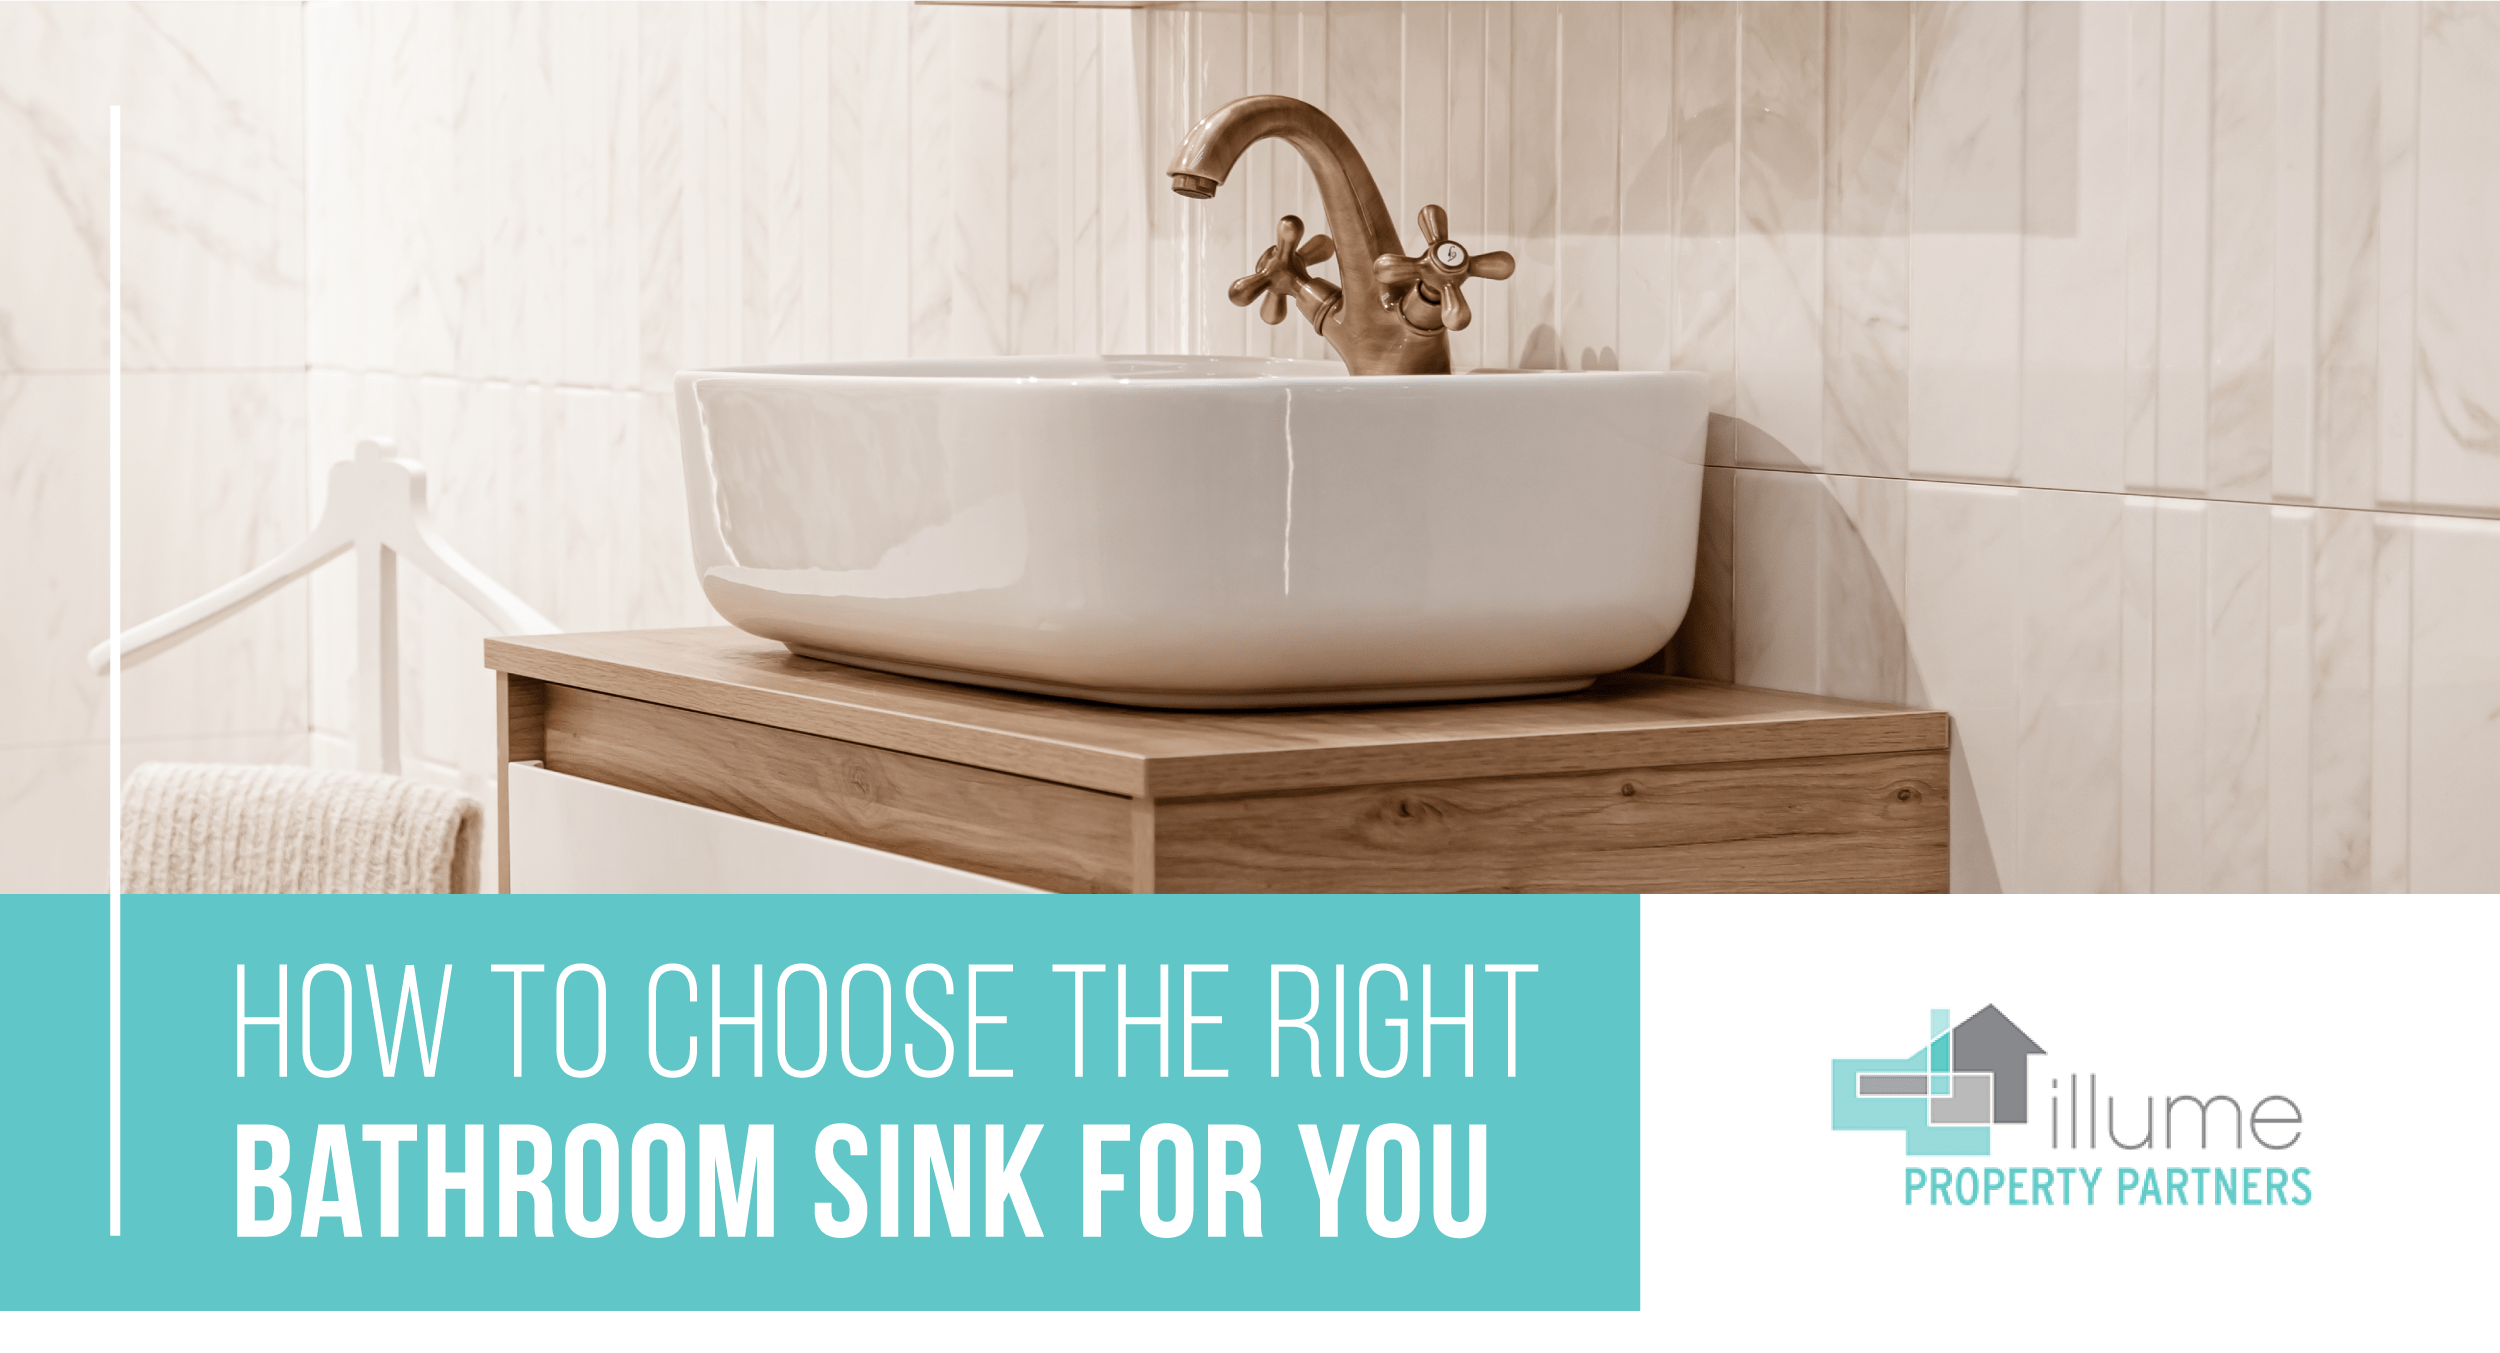 How to Choose the Right Bathroom Sink for You